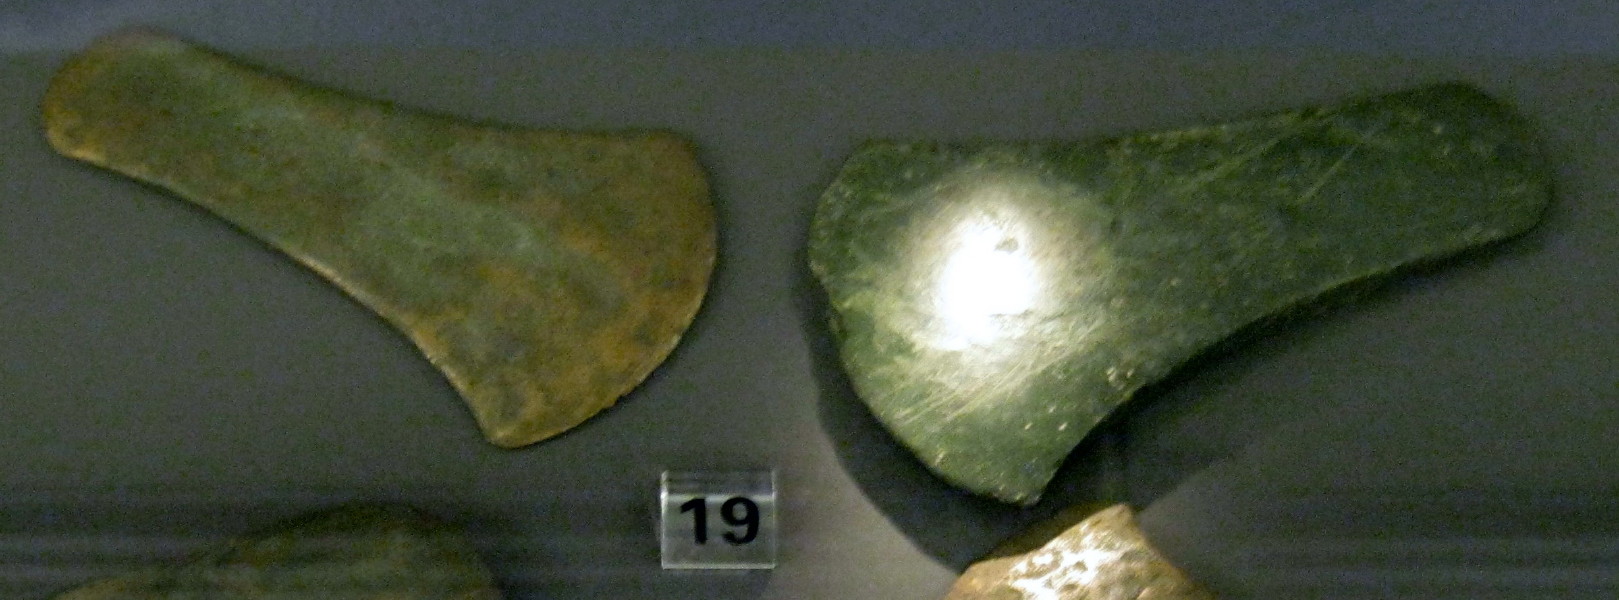 Two bronze flat axes from the Early Bronze Age around 3100 to 3800 years before present.  Found at Drumshade Farm, Angus.  Photographed in September 2012